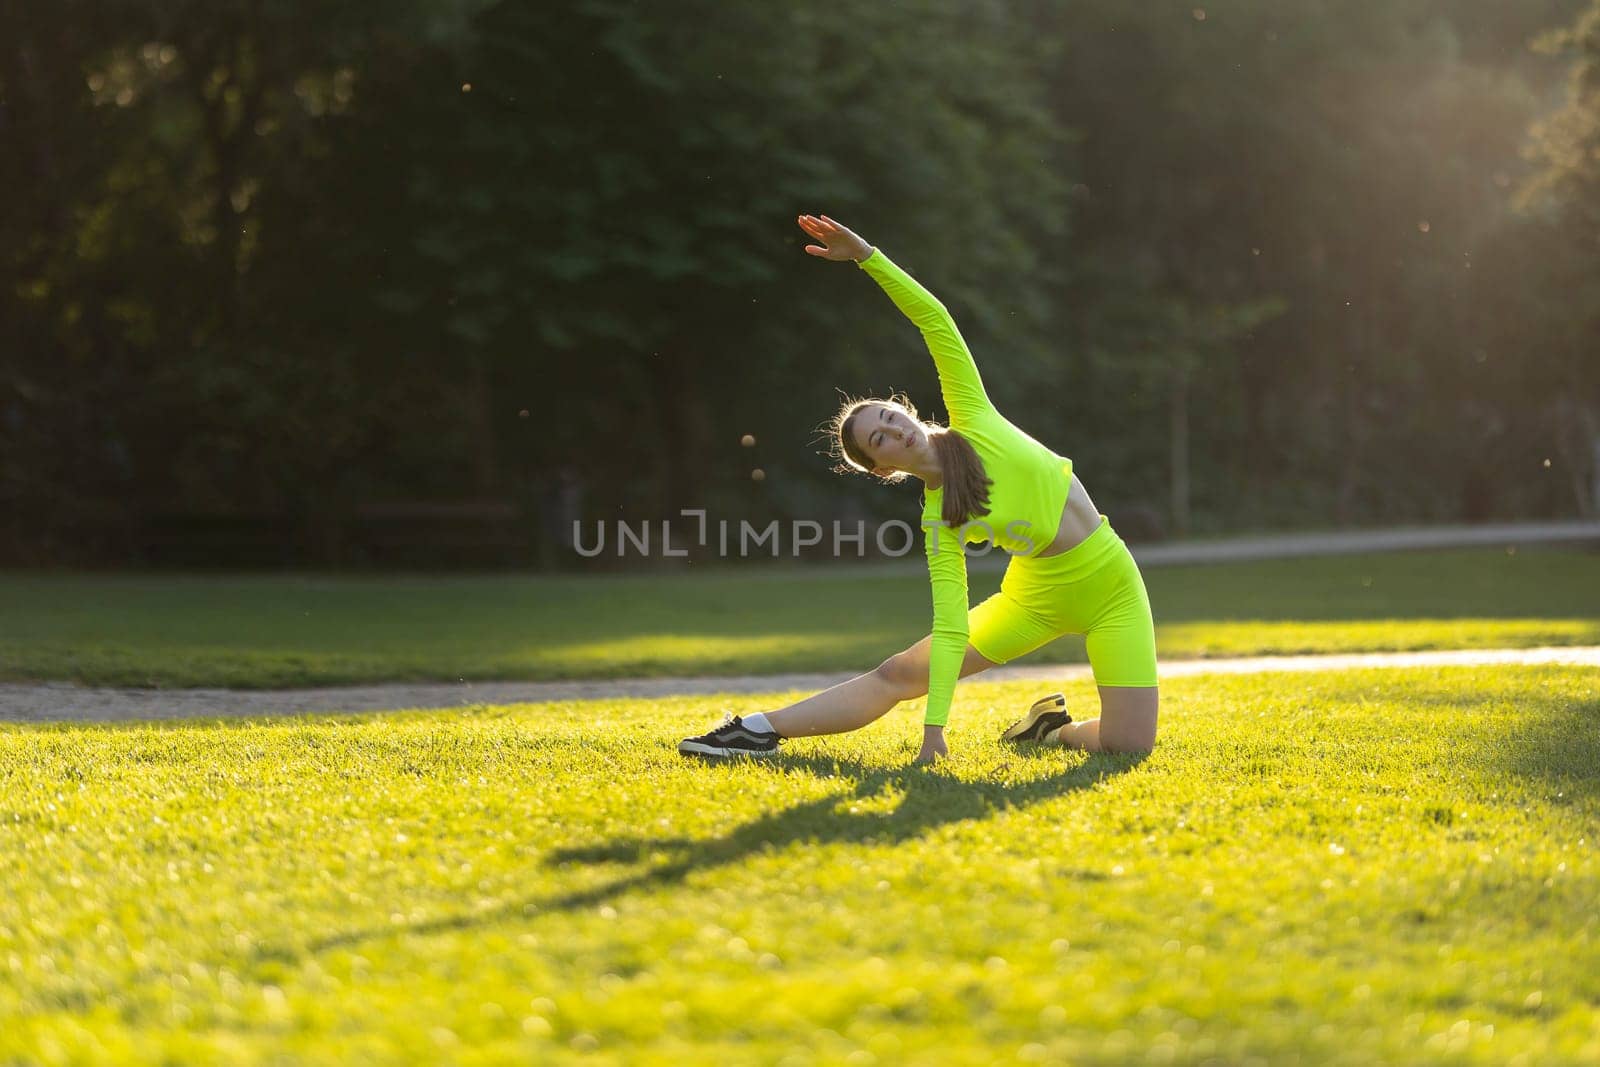 A woman in a neon green outfit is doing a yoga pose on a grassy field. The bright colors of her outfit and the surrounding green grass create a cheerful and energetic atmosphere